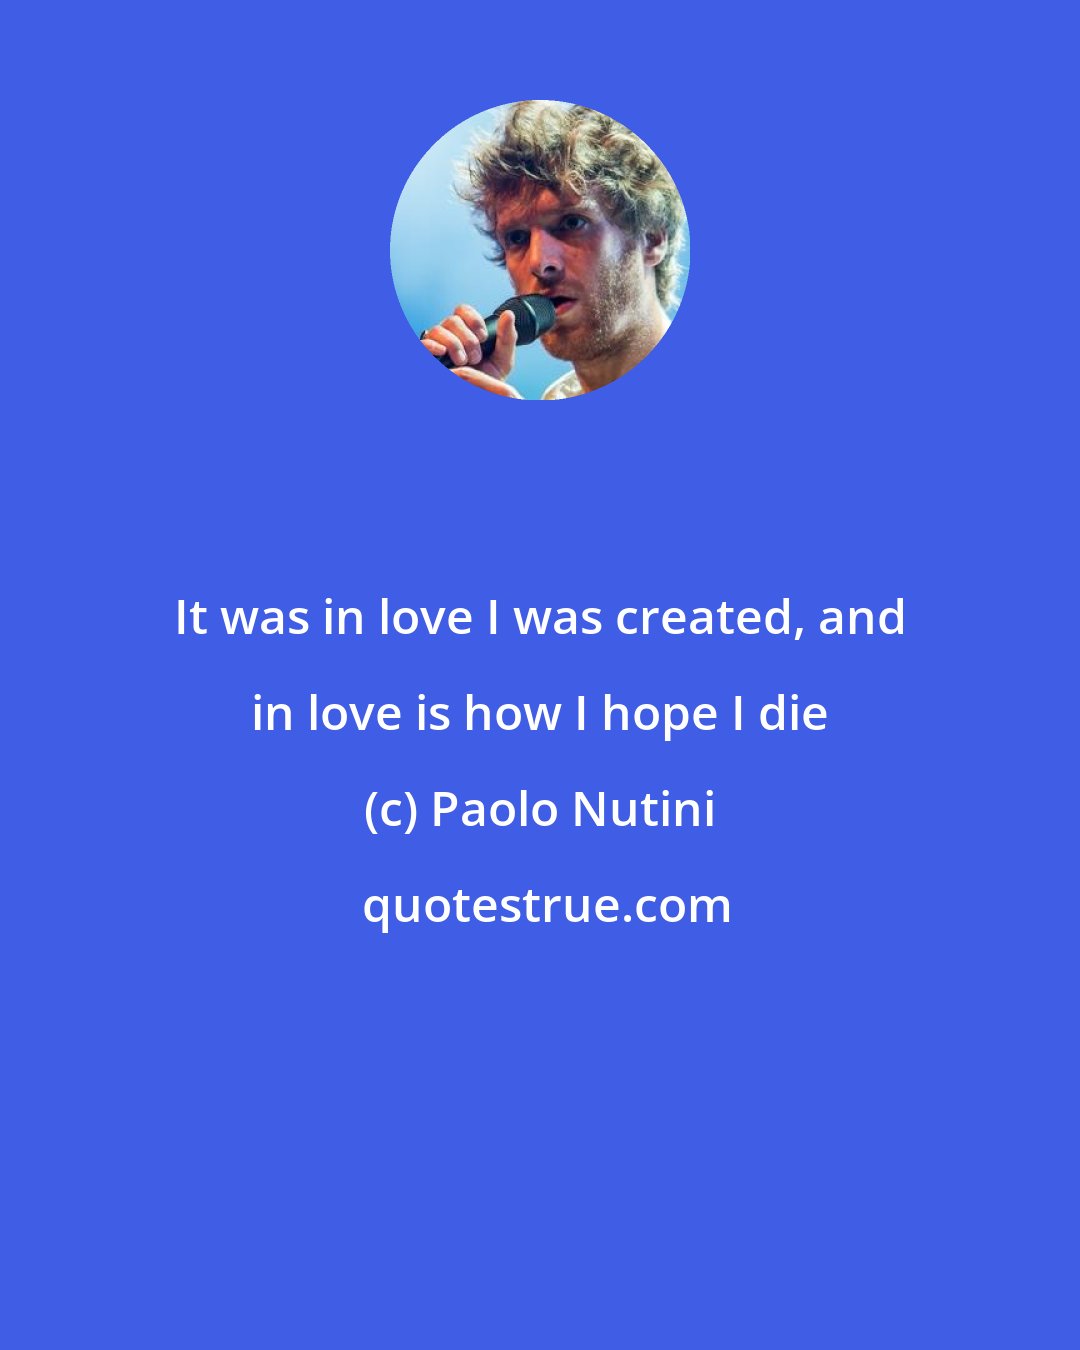 Paolo Nutini: It was in love I was created, and in love is how I hope I die